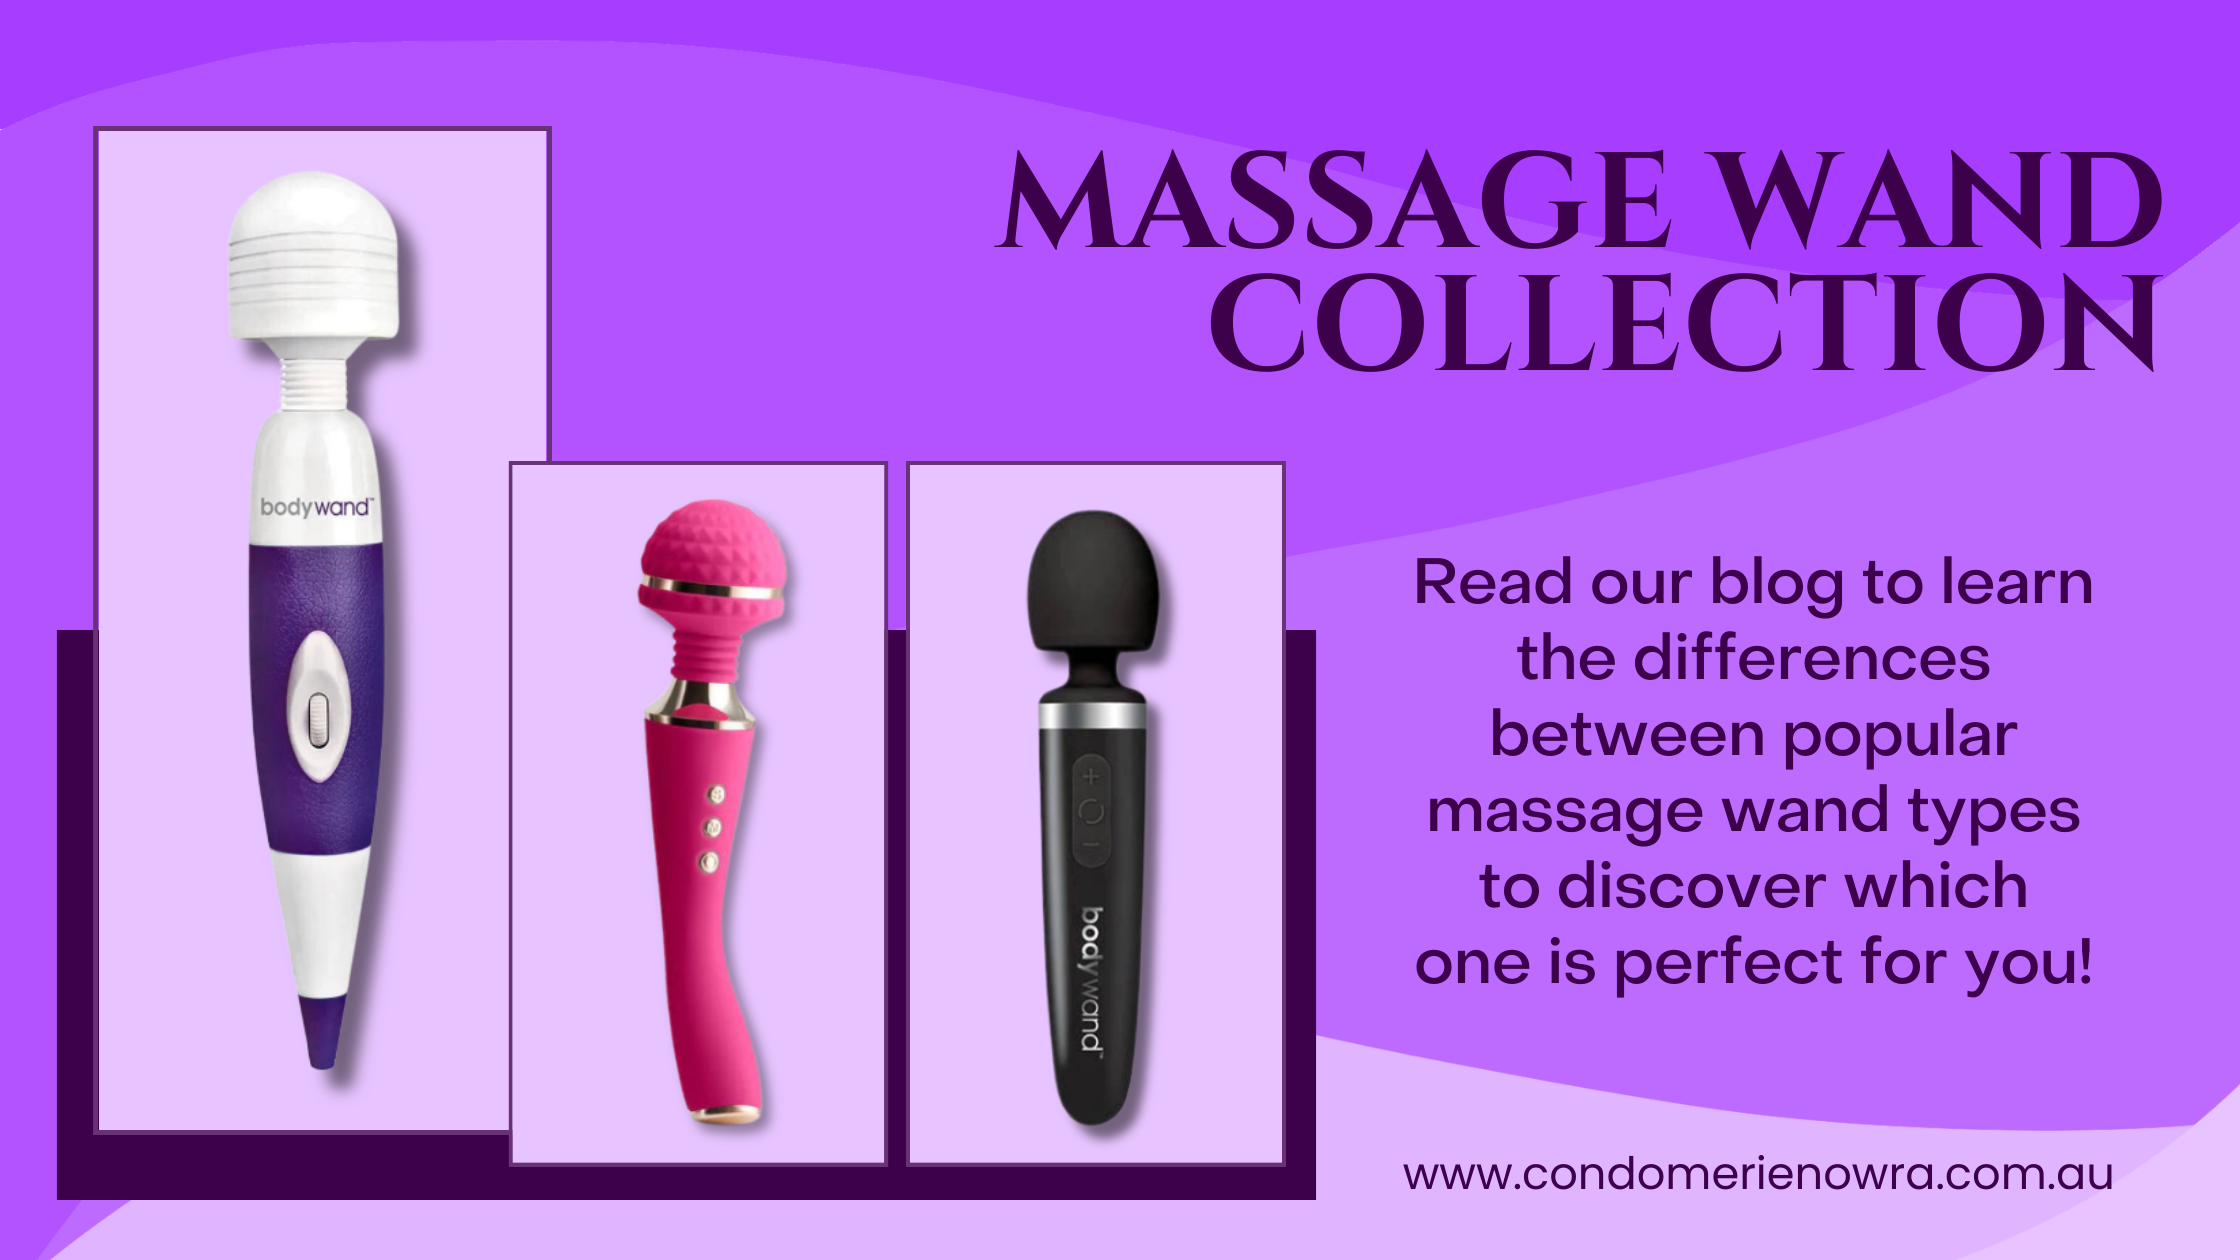 Find Out Which Massage Wand is Perfect For You!